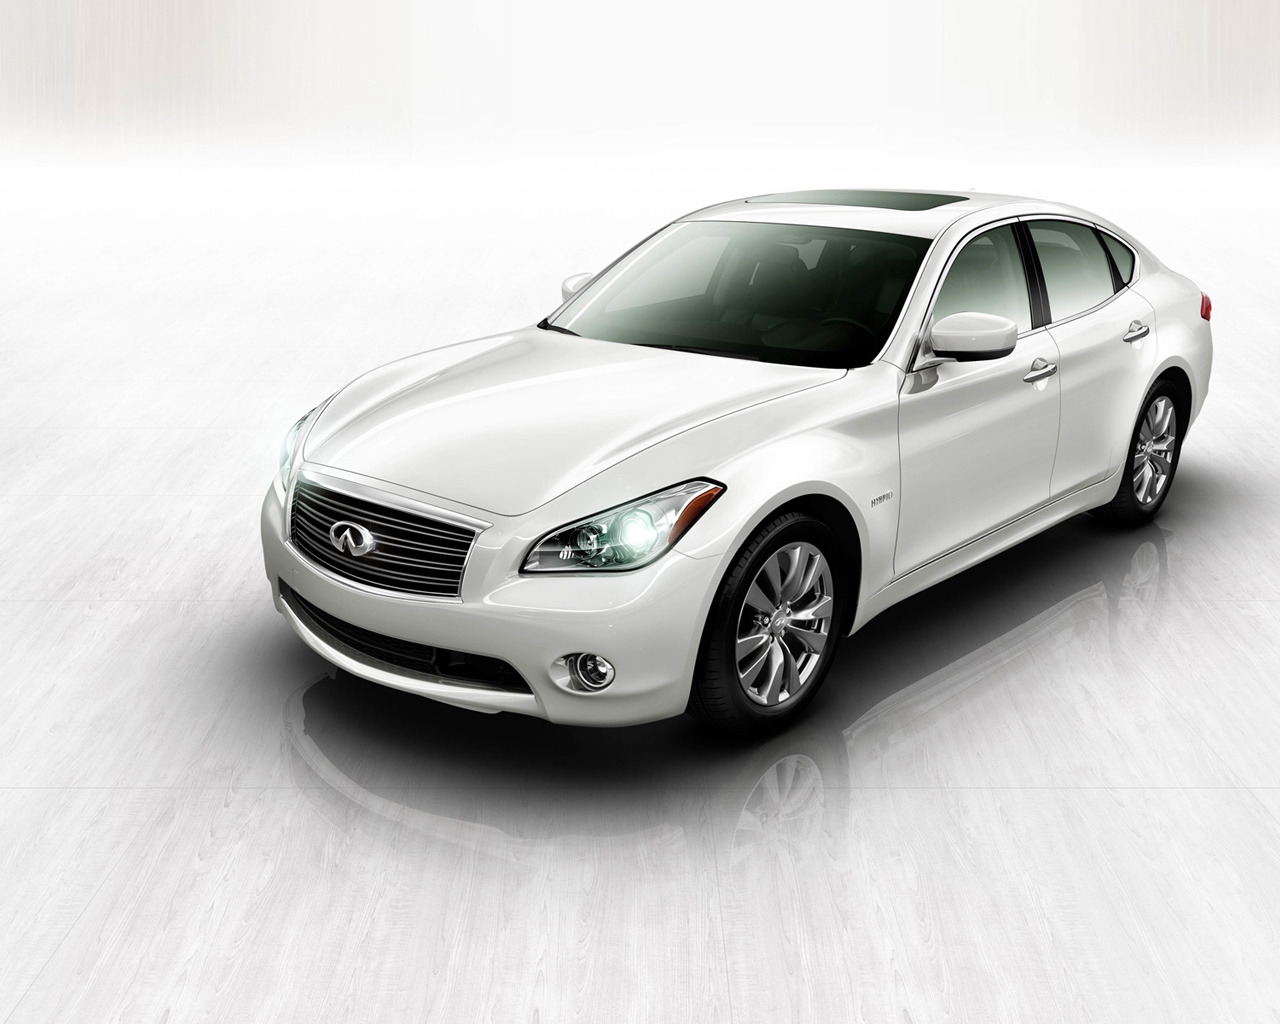 2011 Infiniti M35 Hybrid Front for 1280 x 1024 resolution